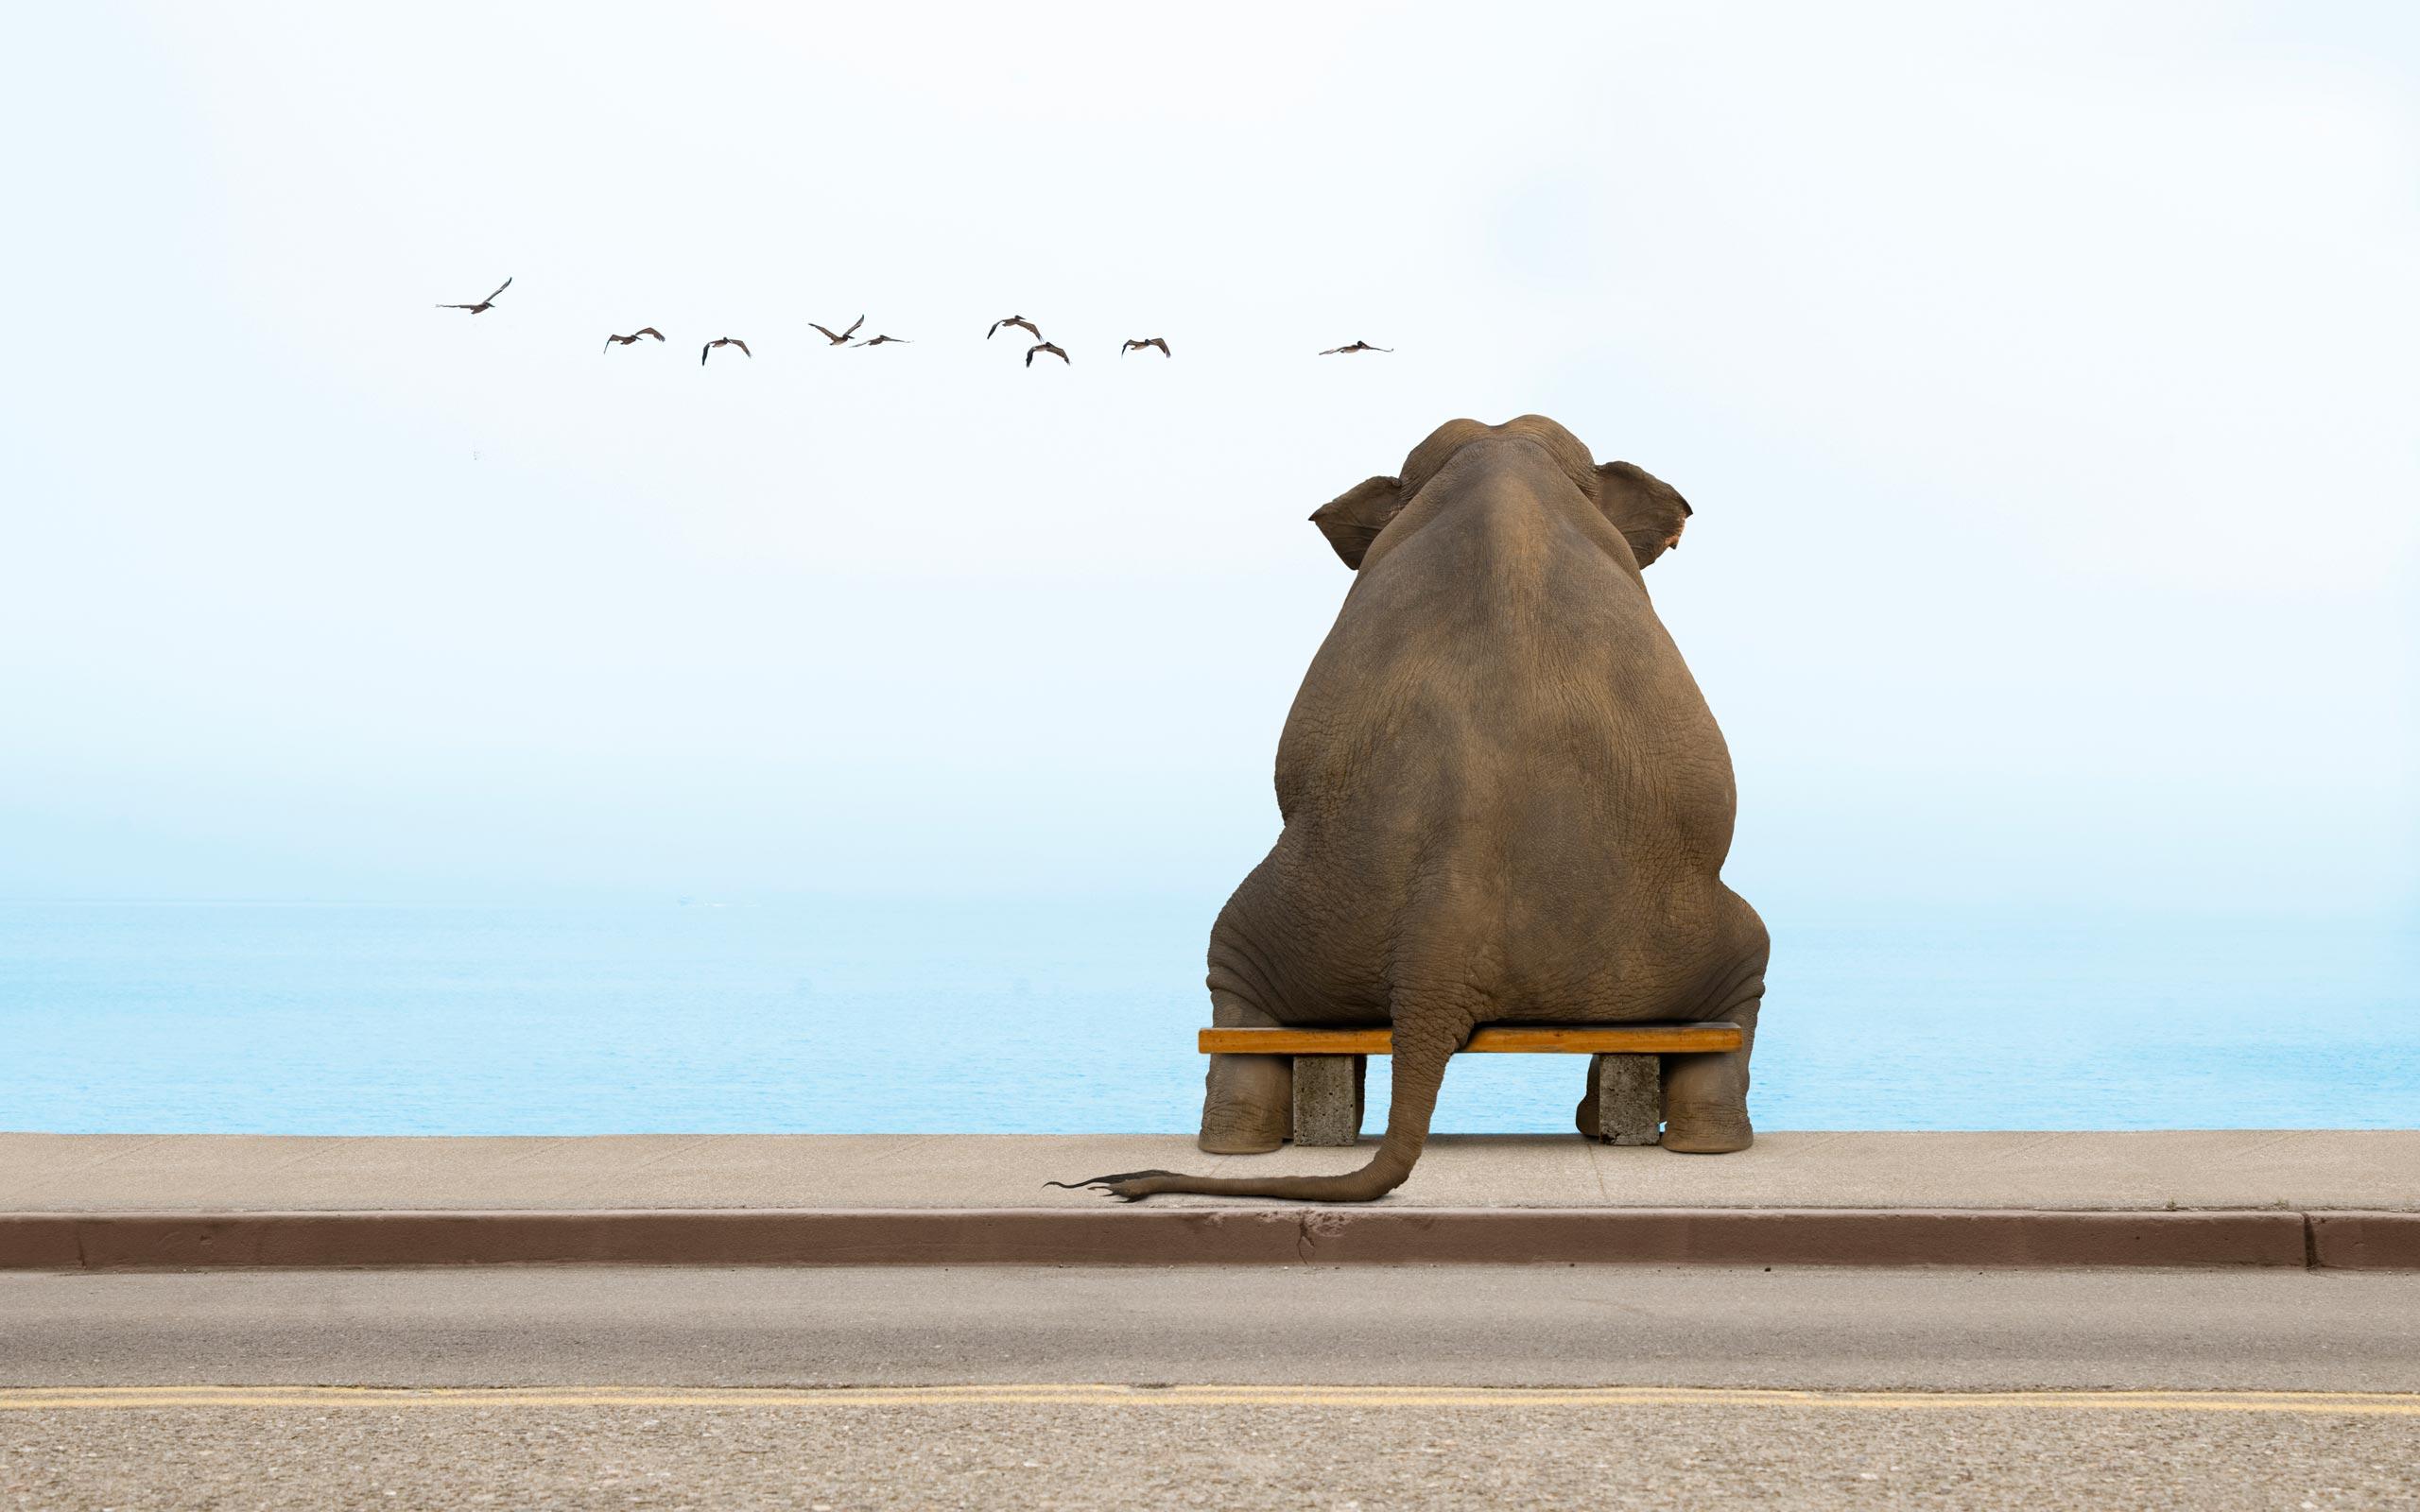 Wallpaper.wiki Elephant Funny Sitting On Bench Wallpaper PIC